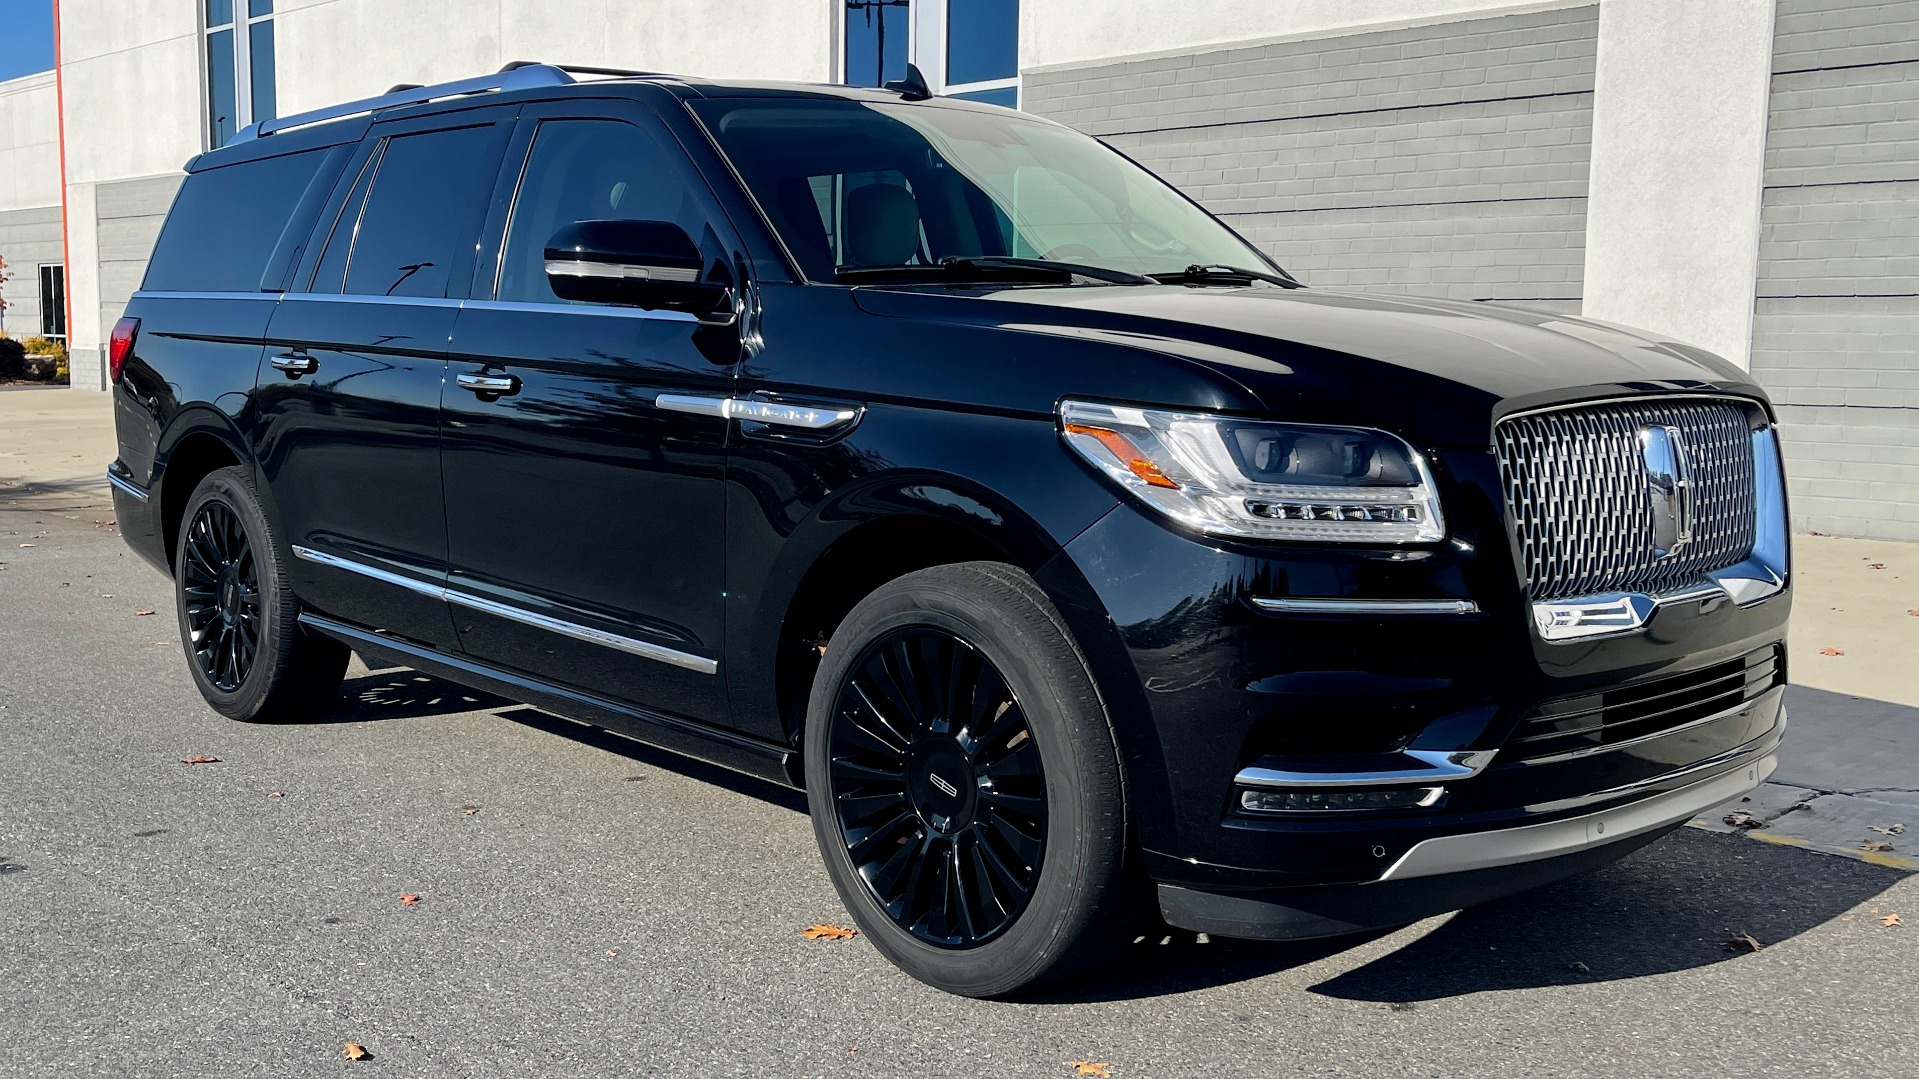 Used 2018 Lincoln NAVIGATOR L 4X4 SELECT / 3.5L V6 / 10-SPD AUTO / NAV / PANO-ROOF / 3-ROW / REARVIEW for sale Sold at Formula Imports in Charlotte NC 28227 6